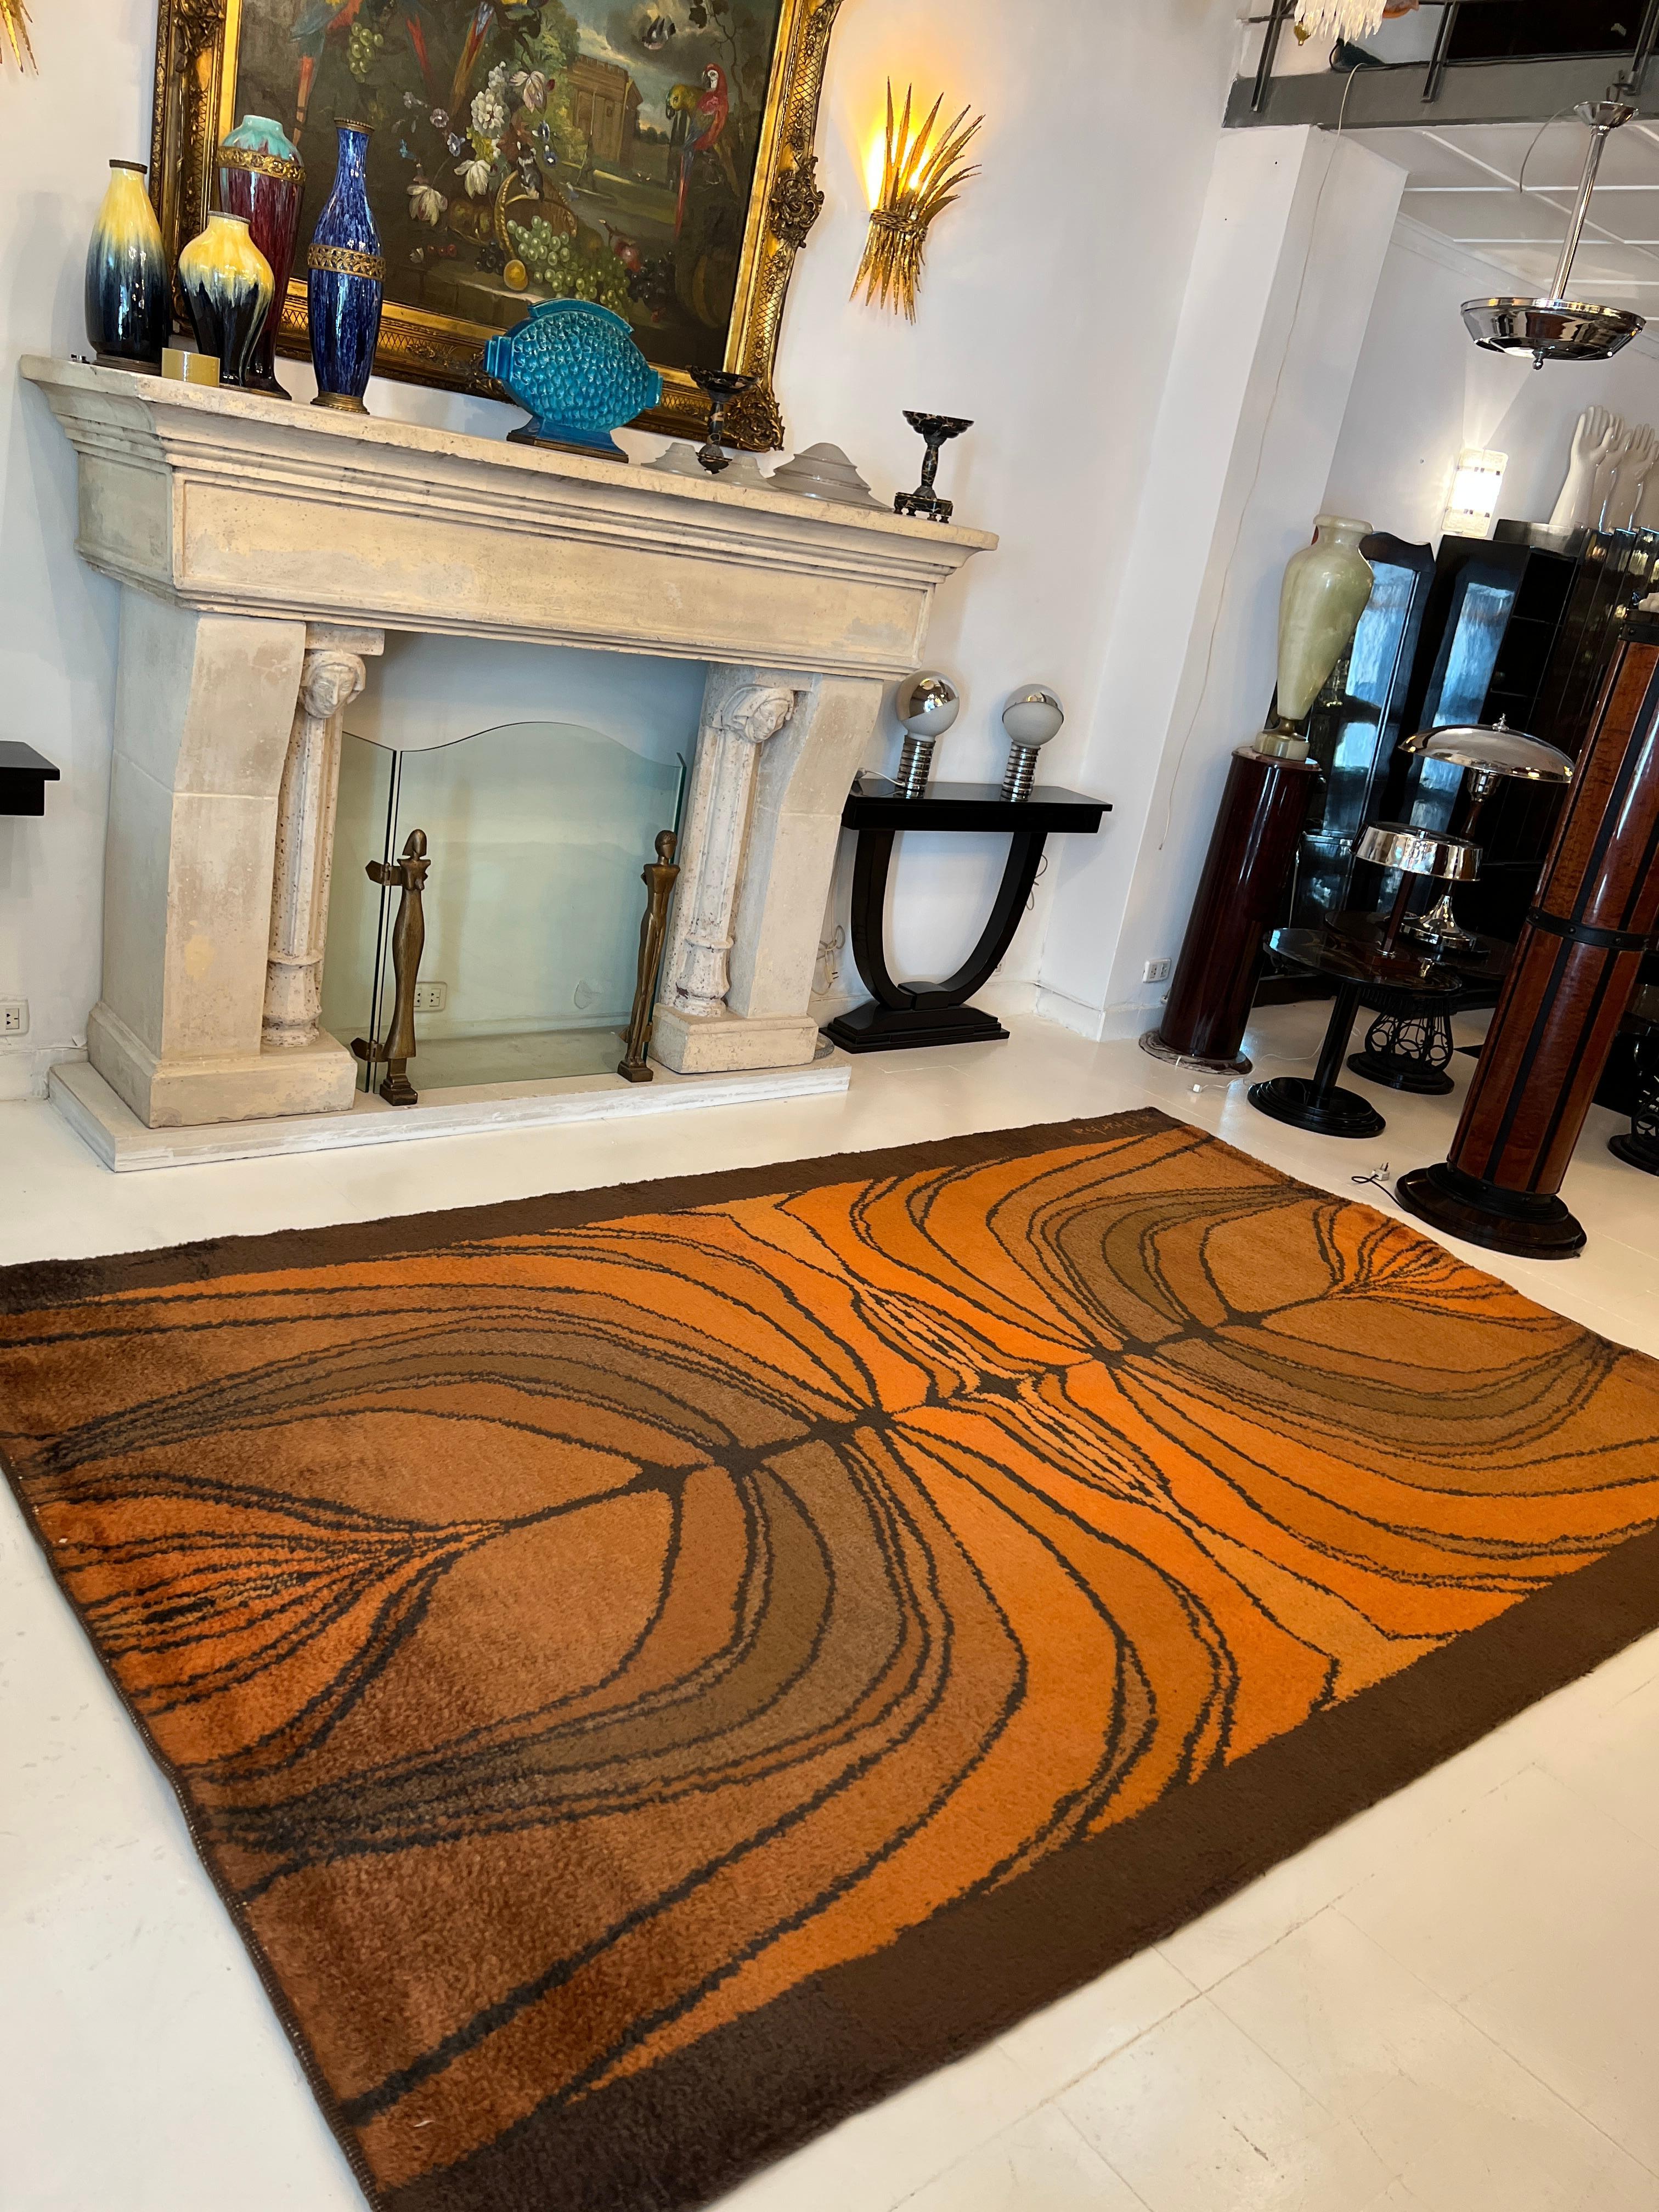 Carpet
Sign: A. Churba
We have specialized in the sale of Art Deco and Art Nouveau and Vintage styles since 1982.If you have any questions we are at your disposal.
Pushing the button that reads 'View All From Seller'. And you can see more objects